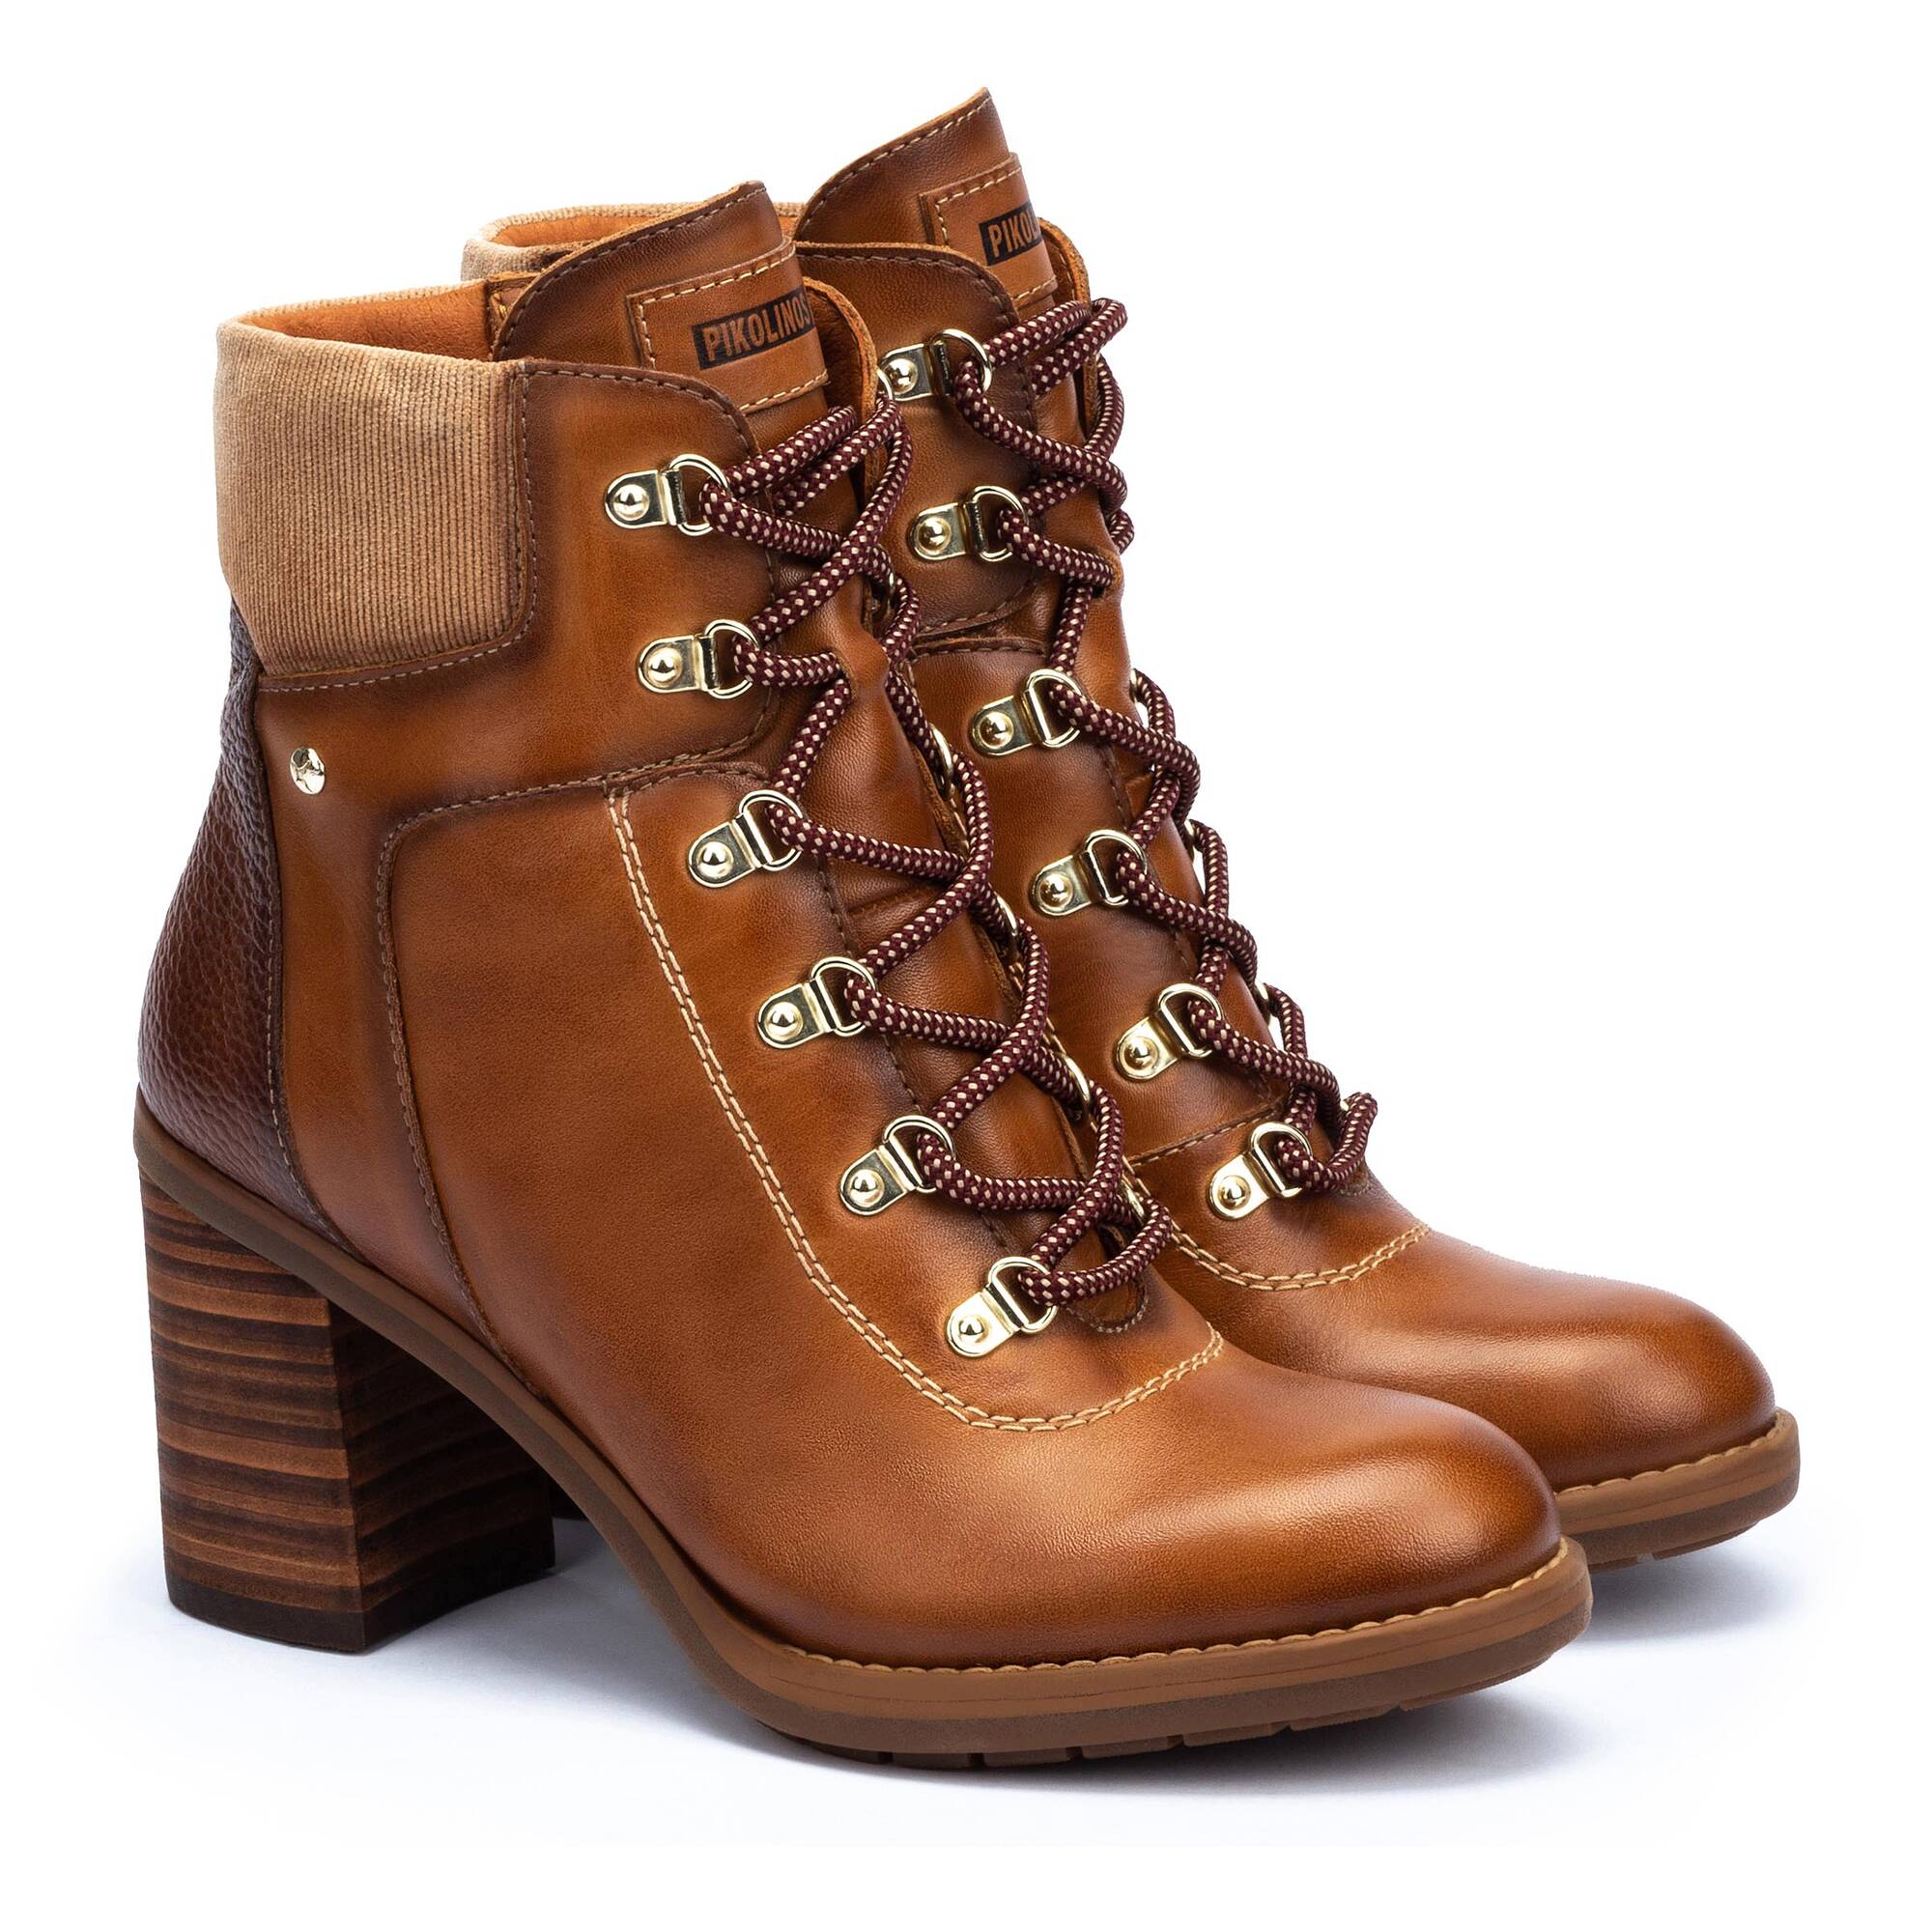 Women’s heeled ankle boots W7S-8851 | Pikolinos Online Shop